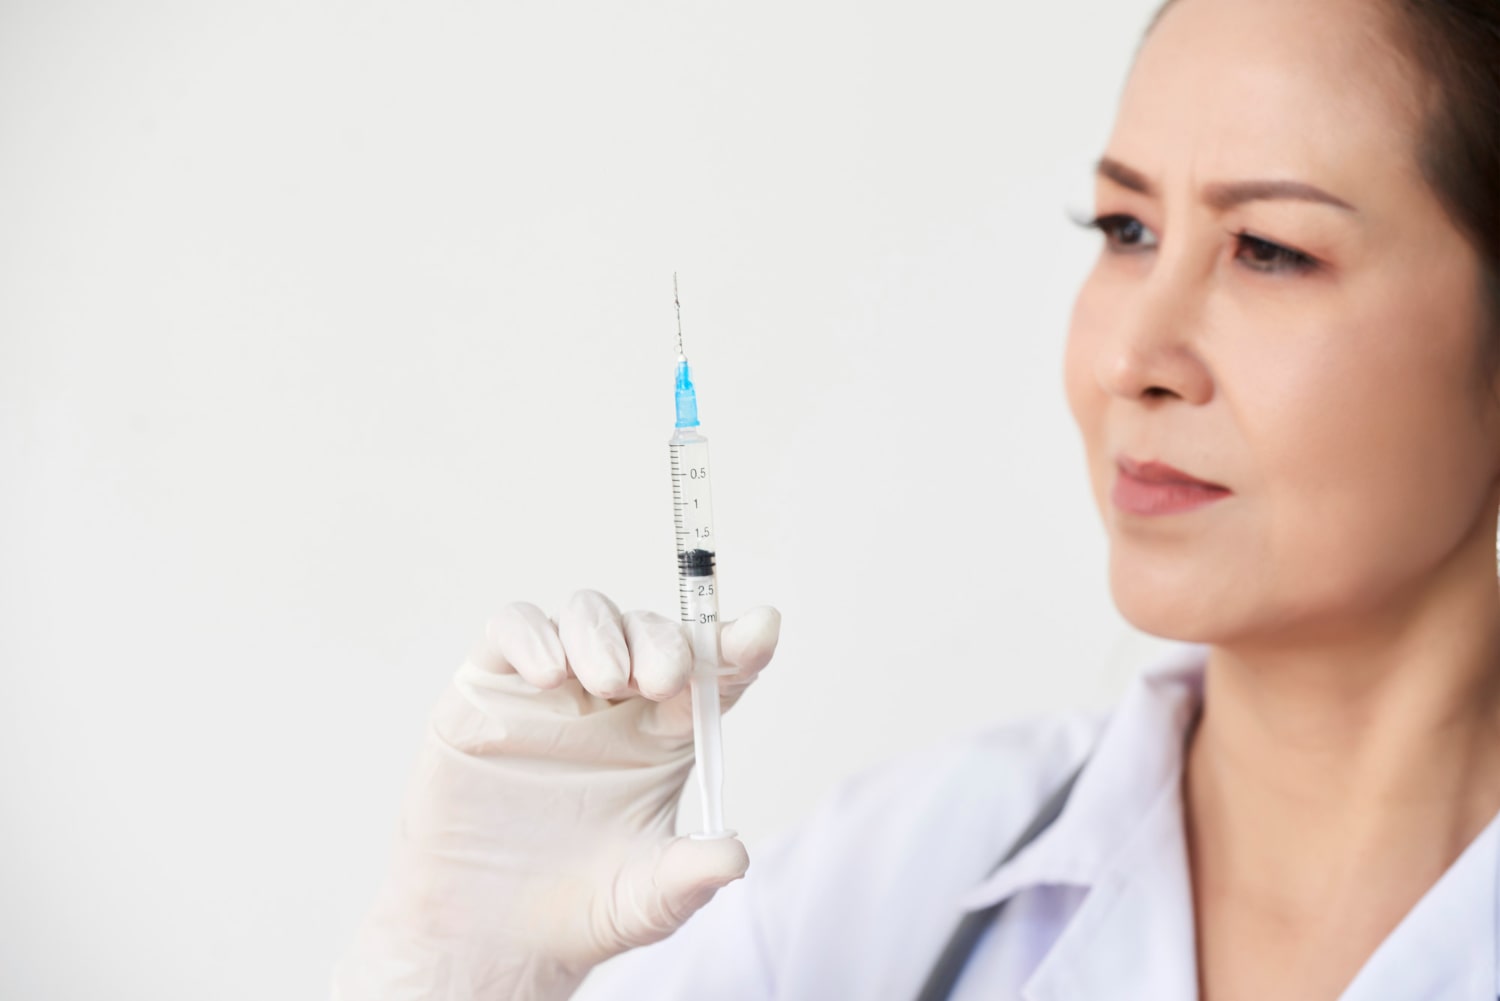 Injectable Platelet-Rich Fibrin being used in dental surgery to enhance healing and tissue regeneration, showcasing its application in modern dentistry.